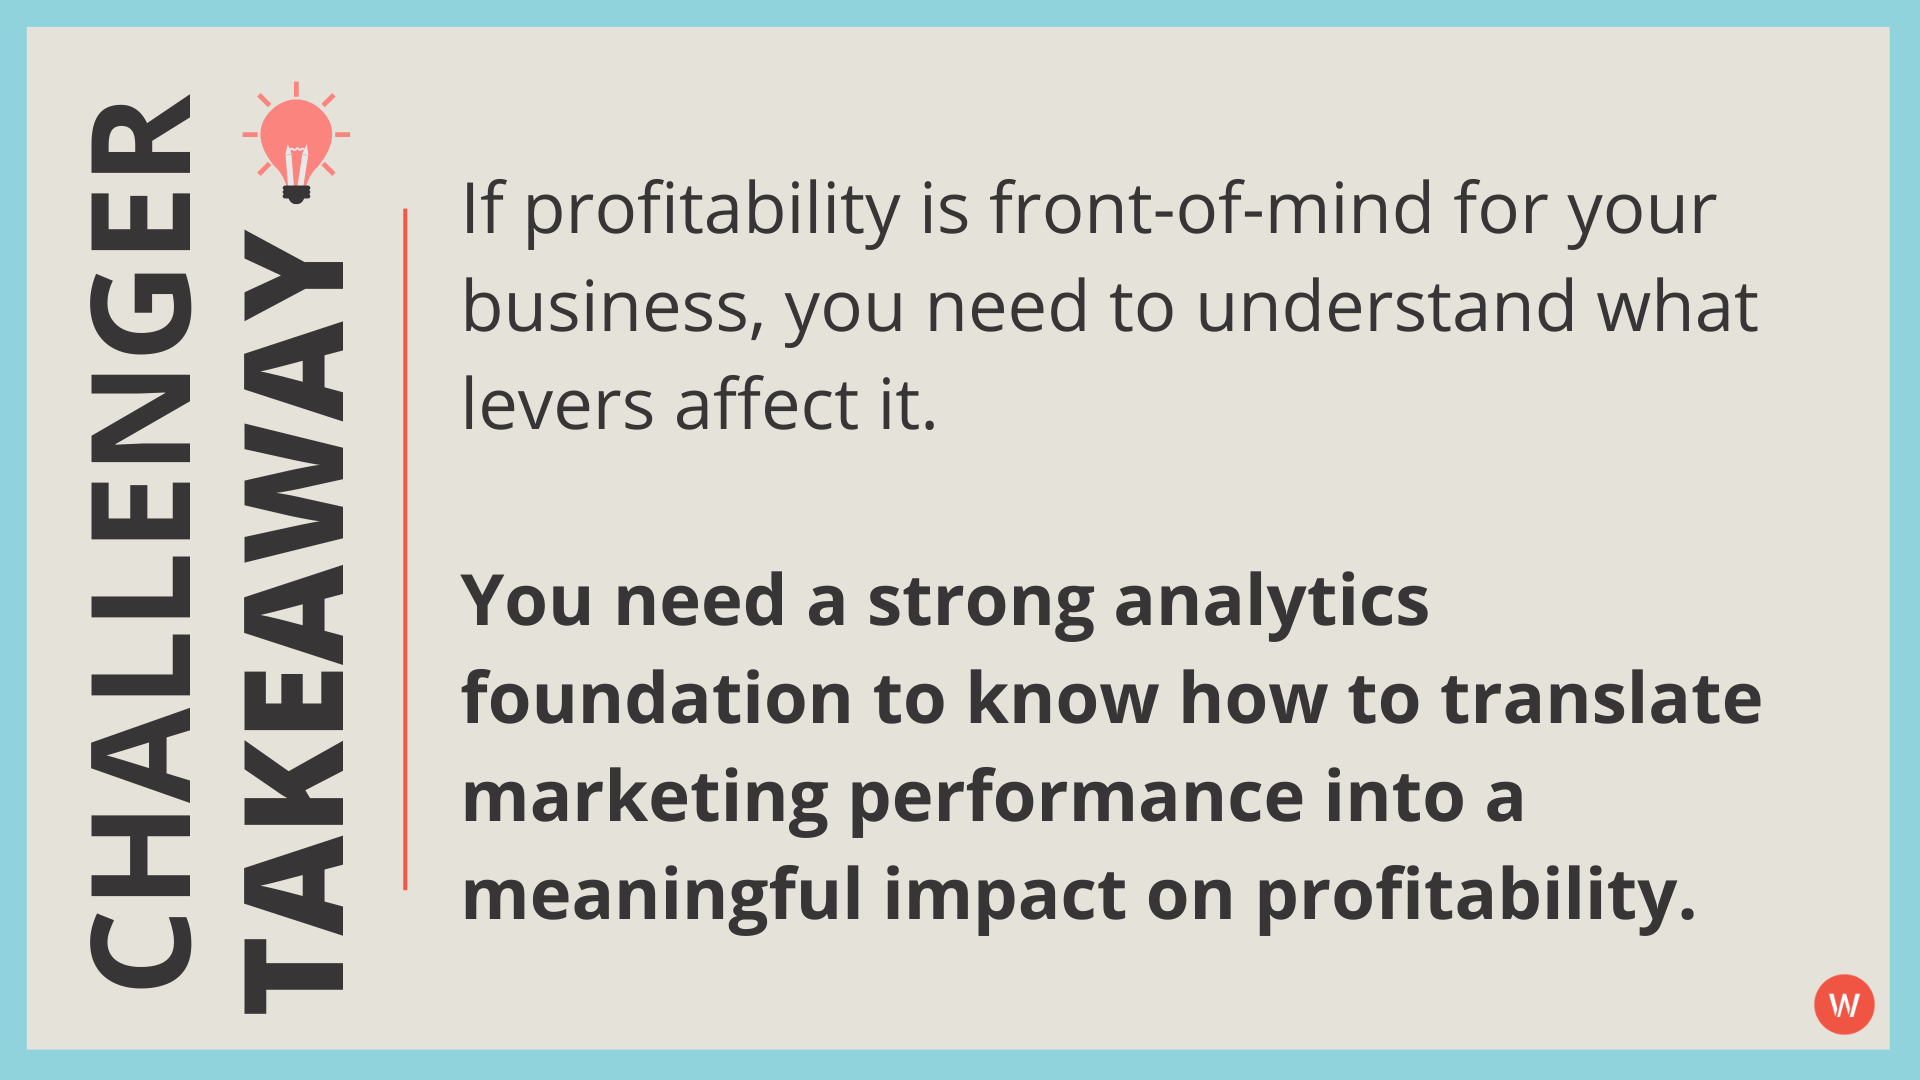 If profitability is front-of-mind for your business, you need to understand what levers affect it. You need a strong analytics foundation to know how to translate marketing performance into a meaningful impact on profitability, especially around identifying high-value customers and if you’re trying to do more with less.